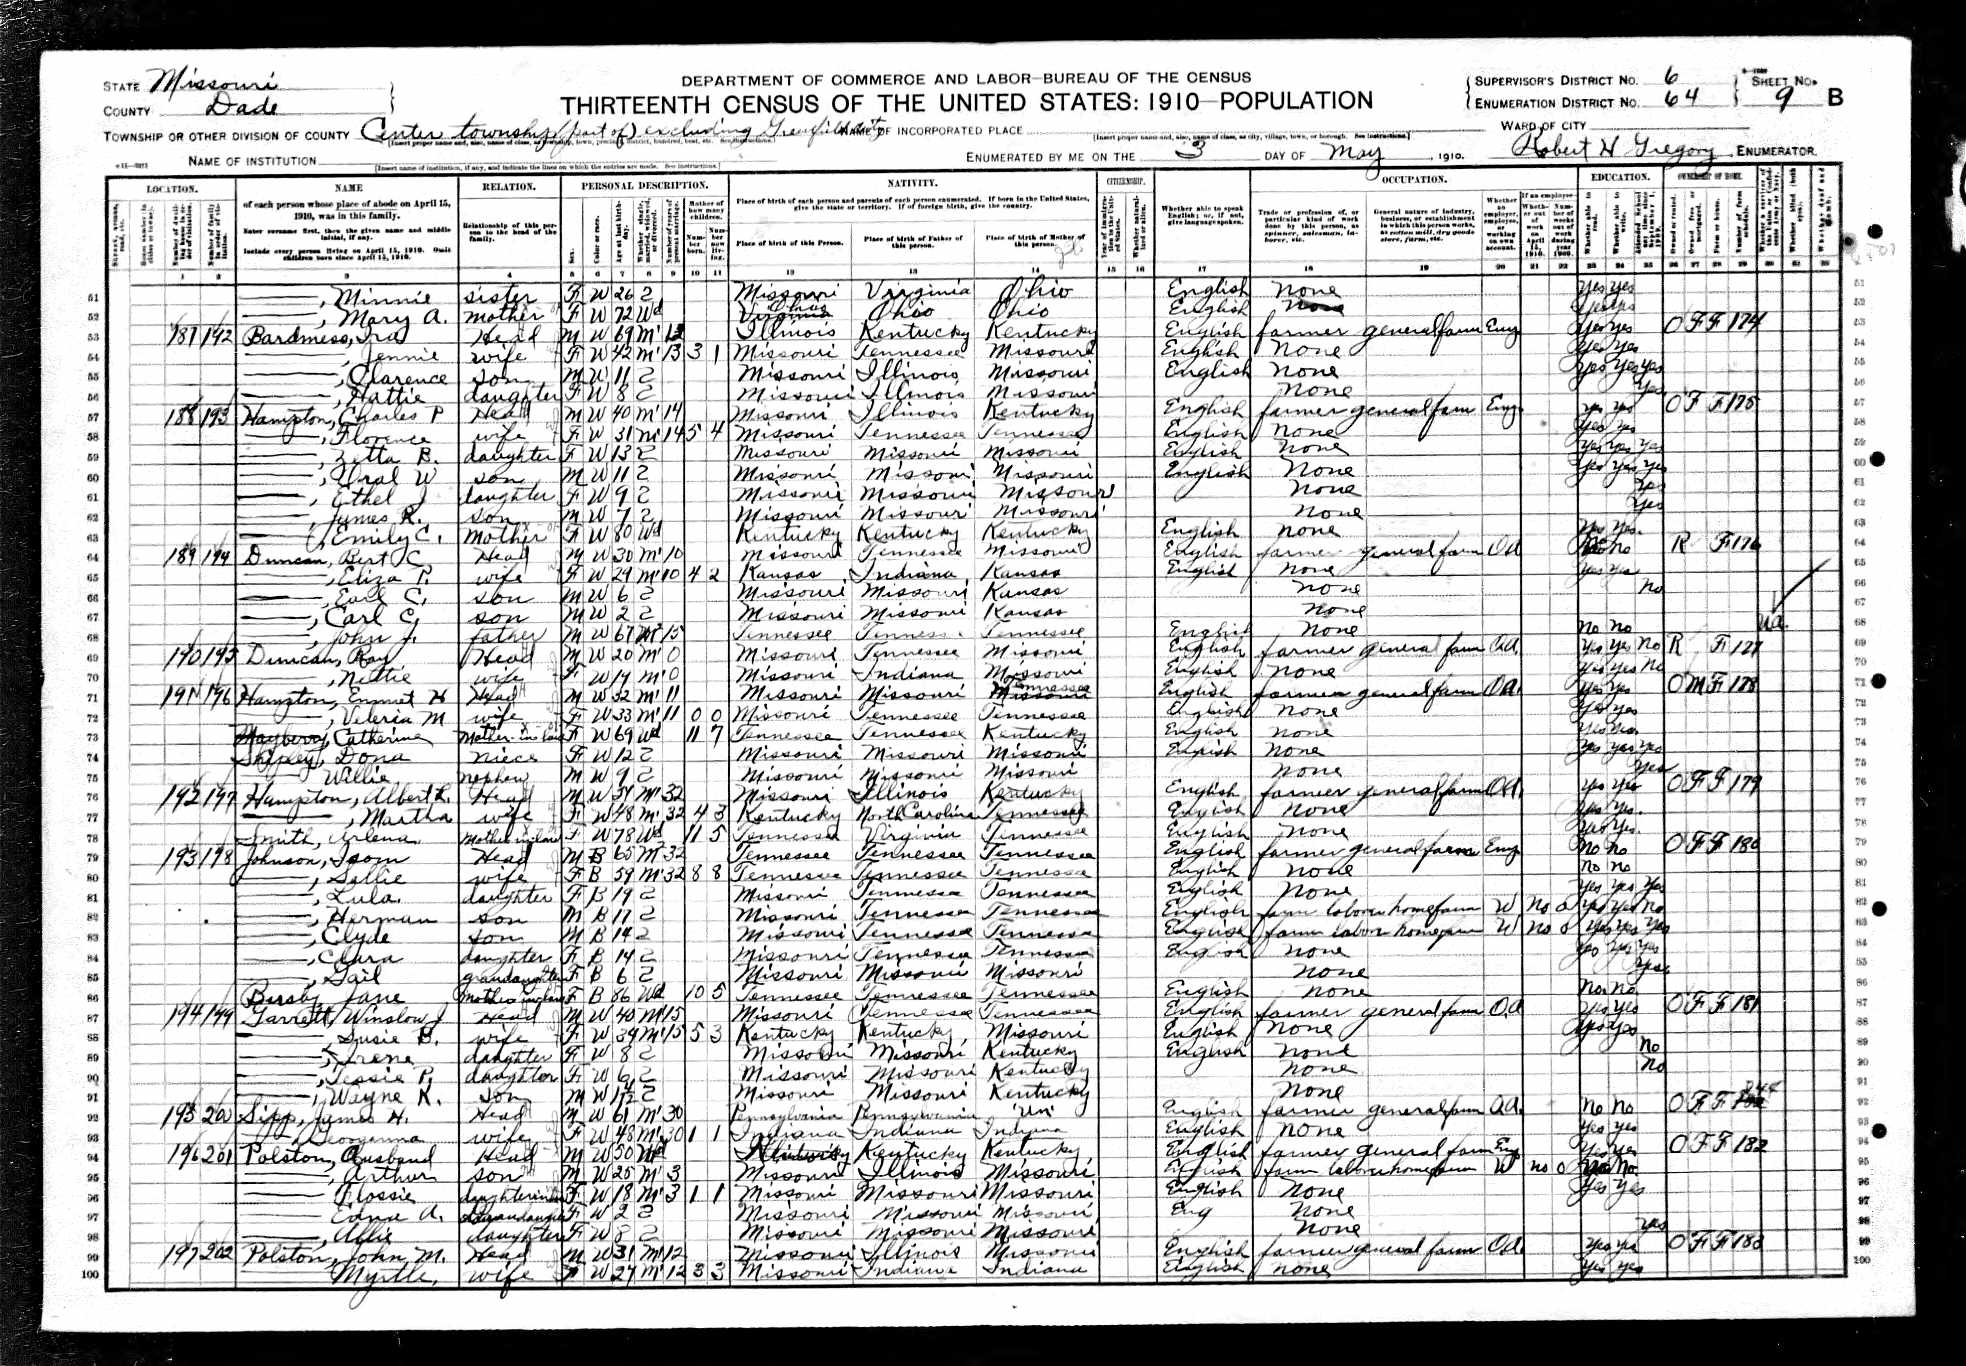 Henry Arthur and Flossie Lee (Lasater) Polston, 1910 Dade County, Missouri, census